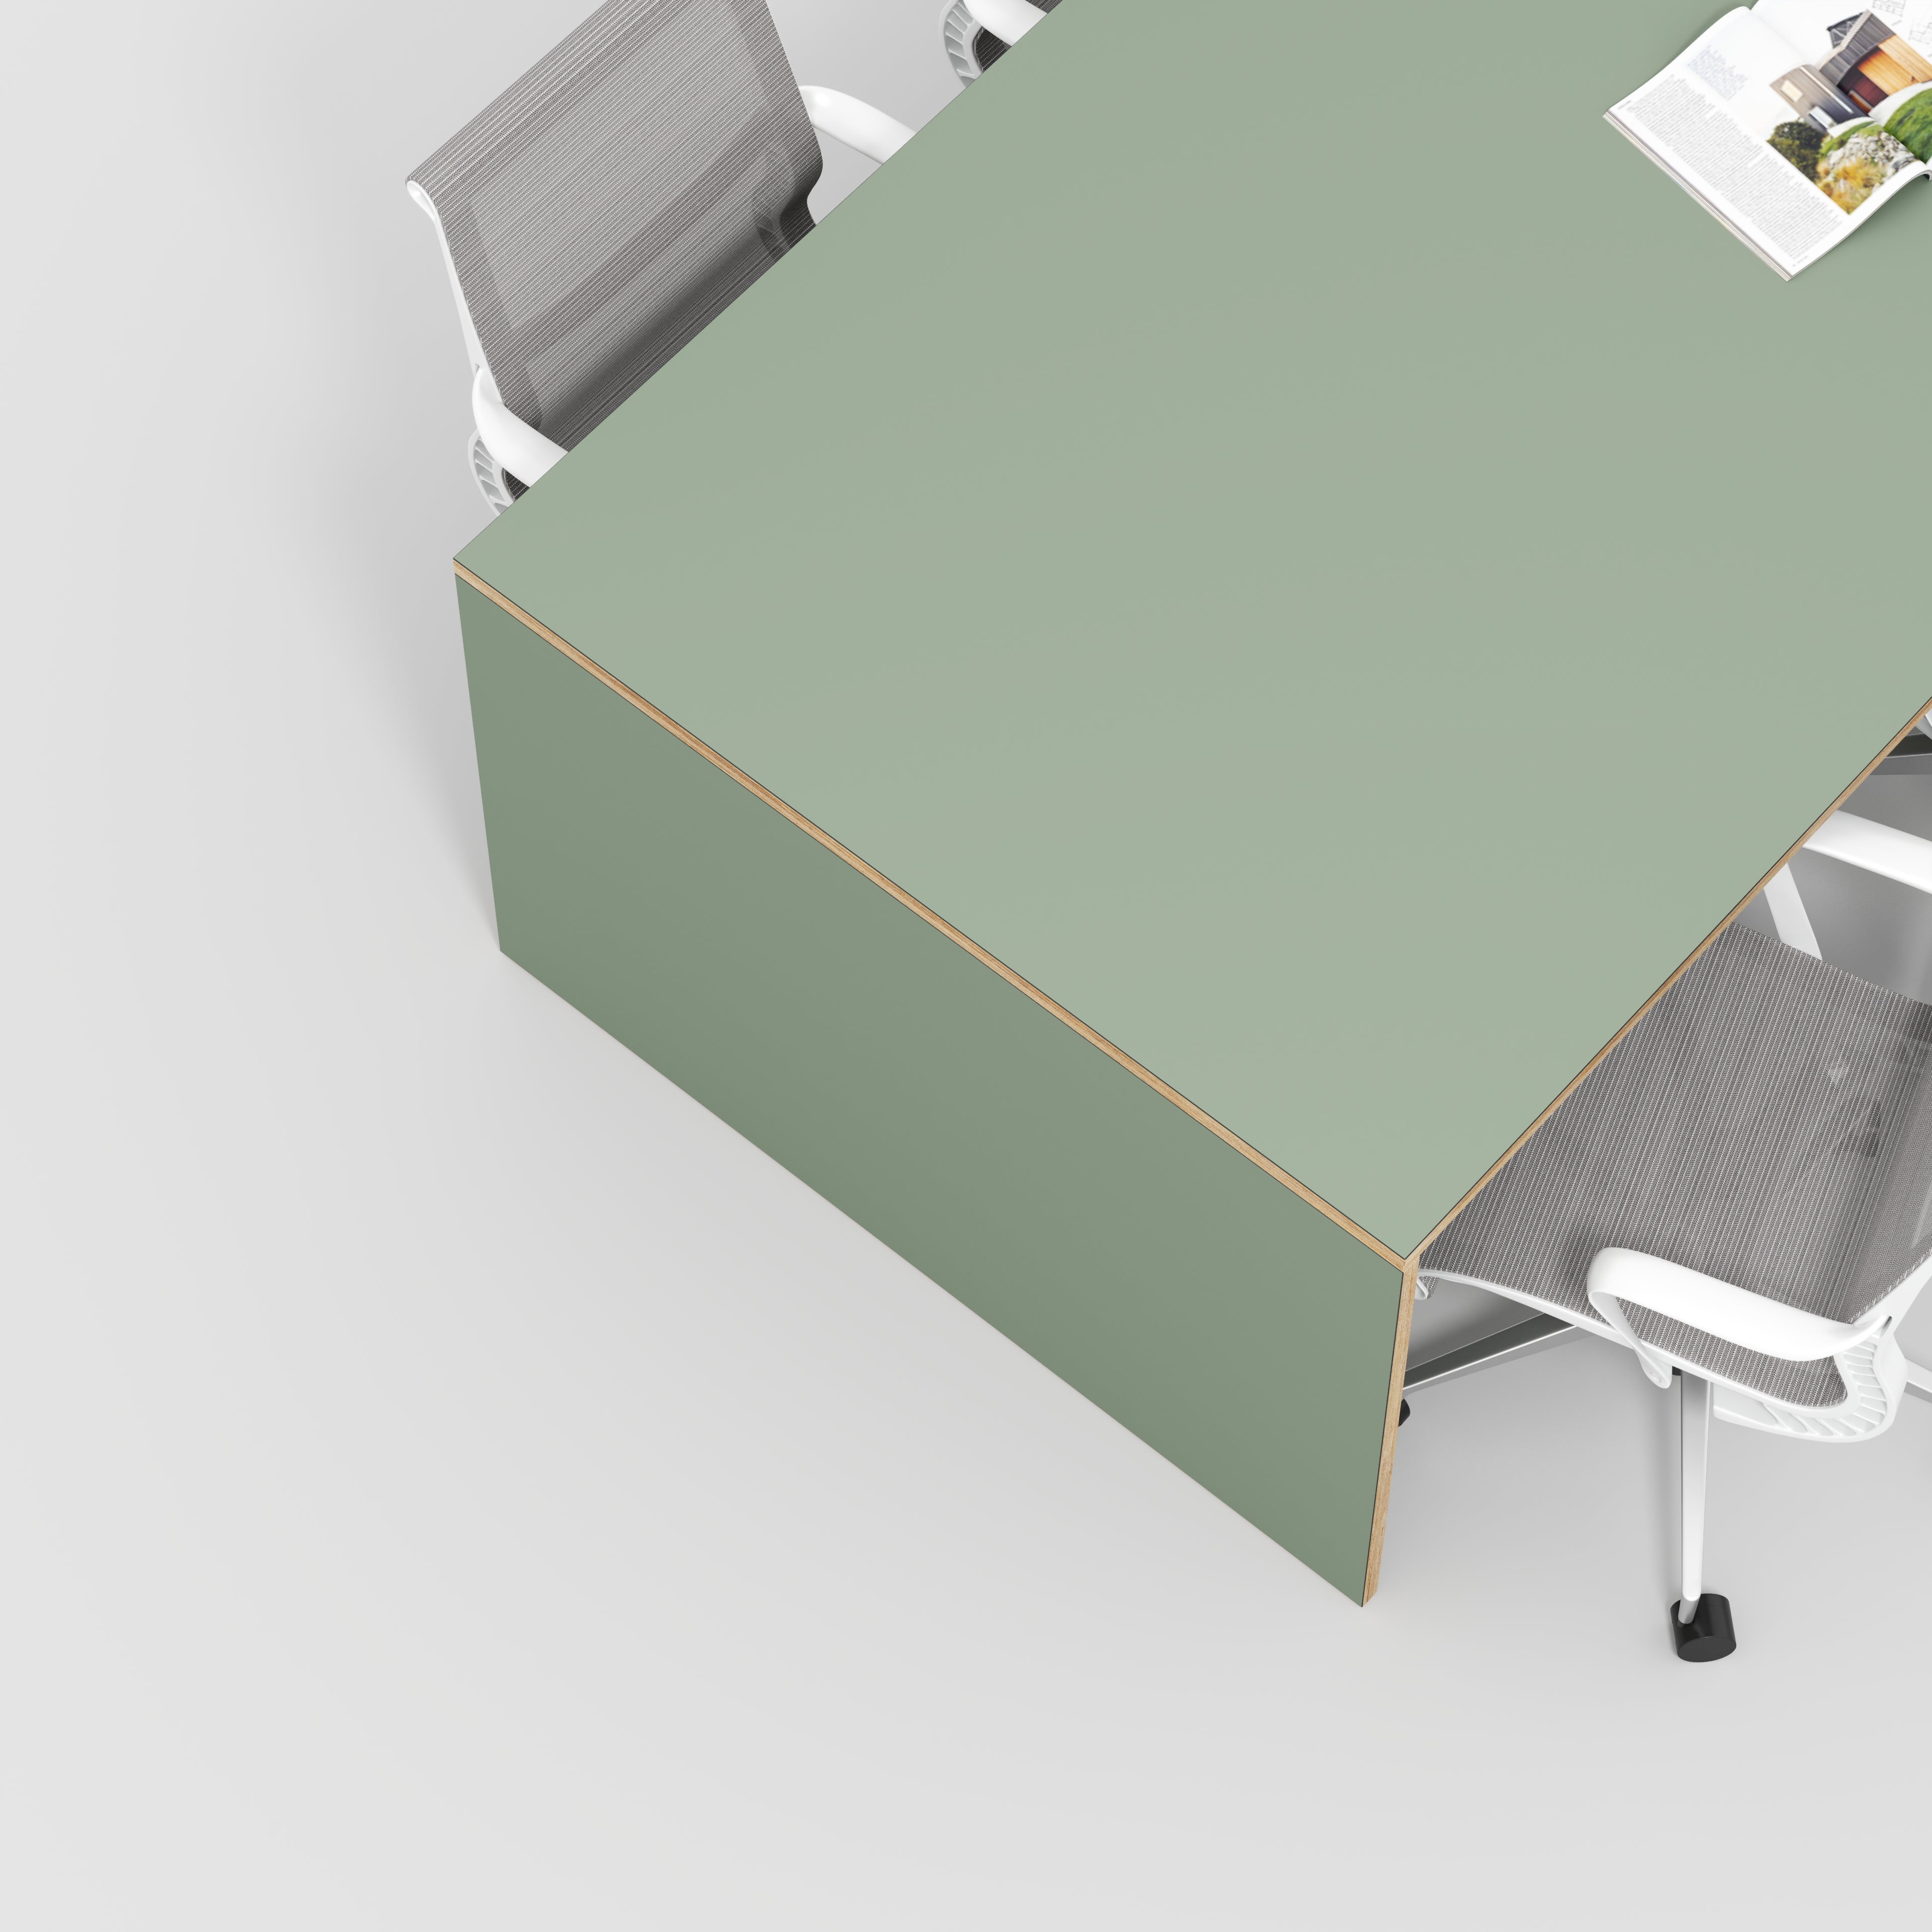 Table with Solid Sides - Formica Green Slate - 2400(w) x 1200(d) x 750(h)